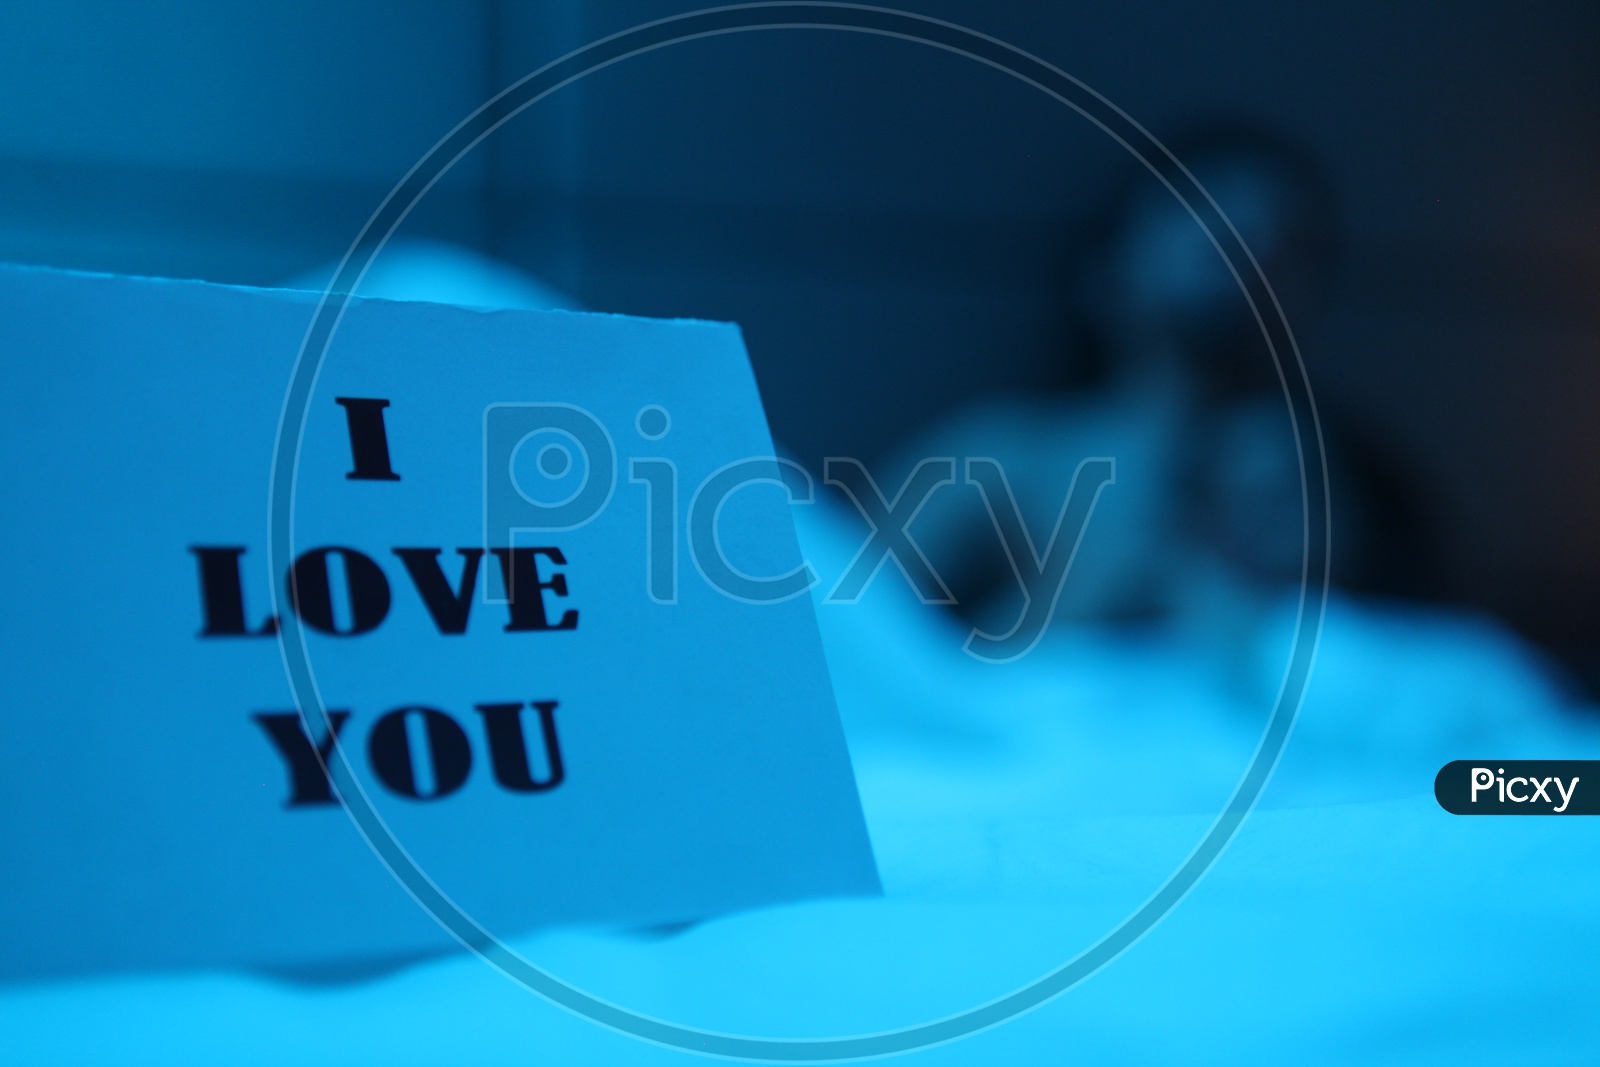 An I Love you Tag on a Table